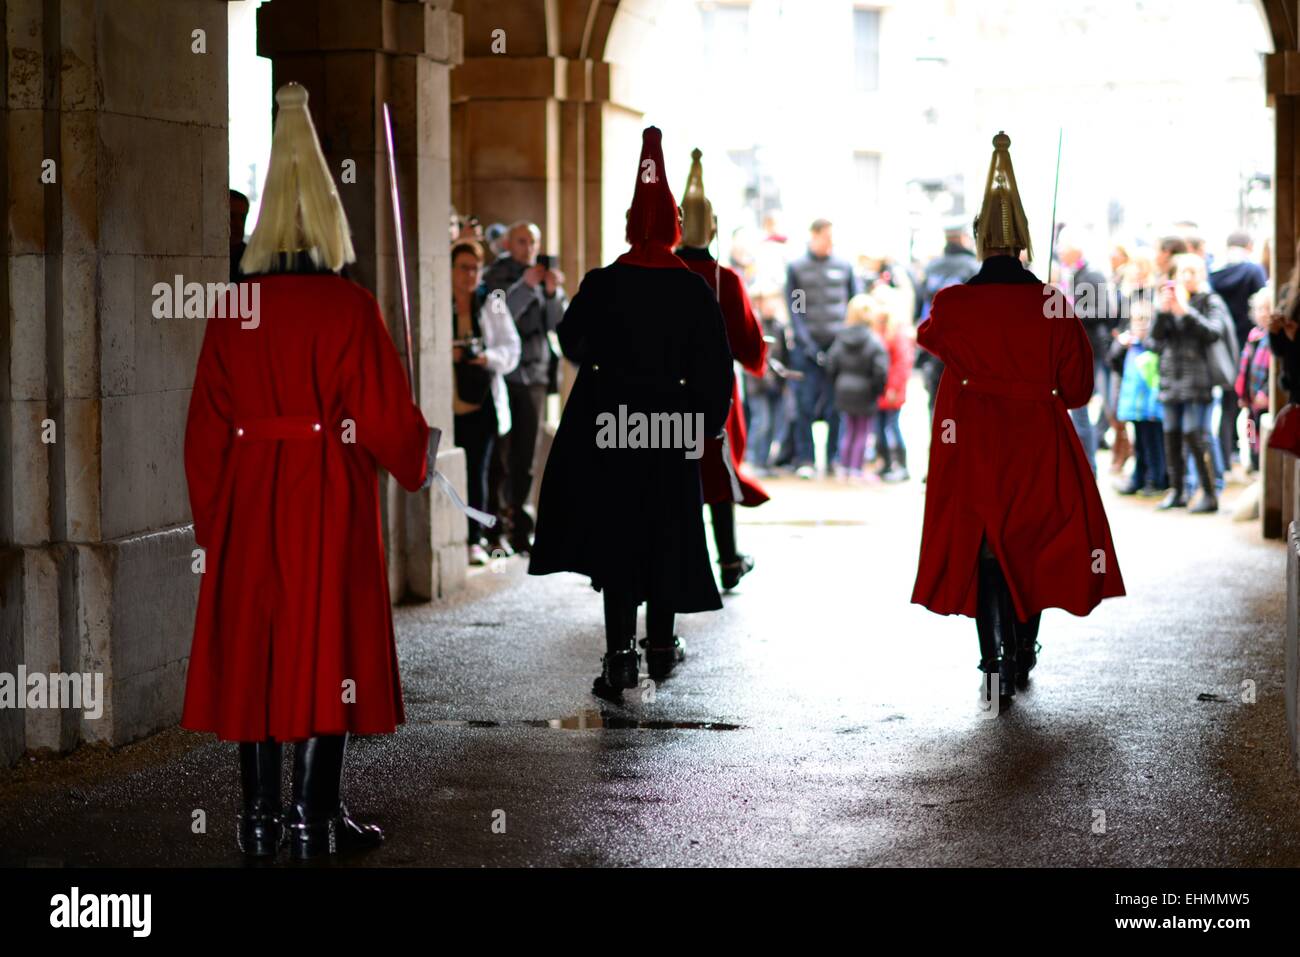 The Reds and Blues at Changing of the Guards at the Horse Guards Parade, Londres, Royaume-Uni. Banque D'Images